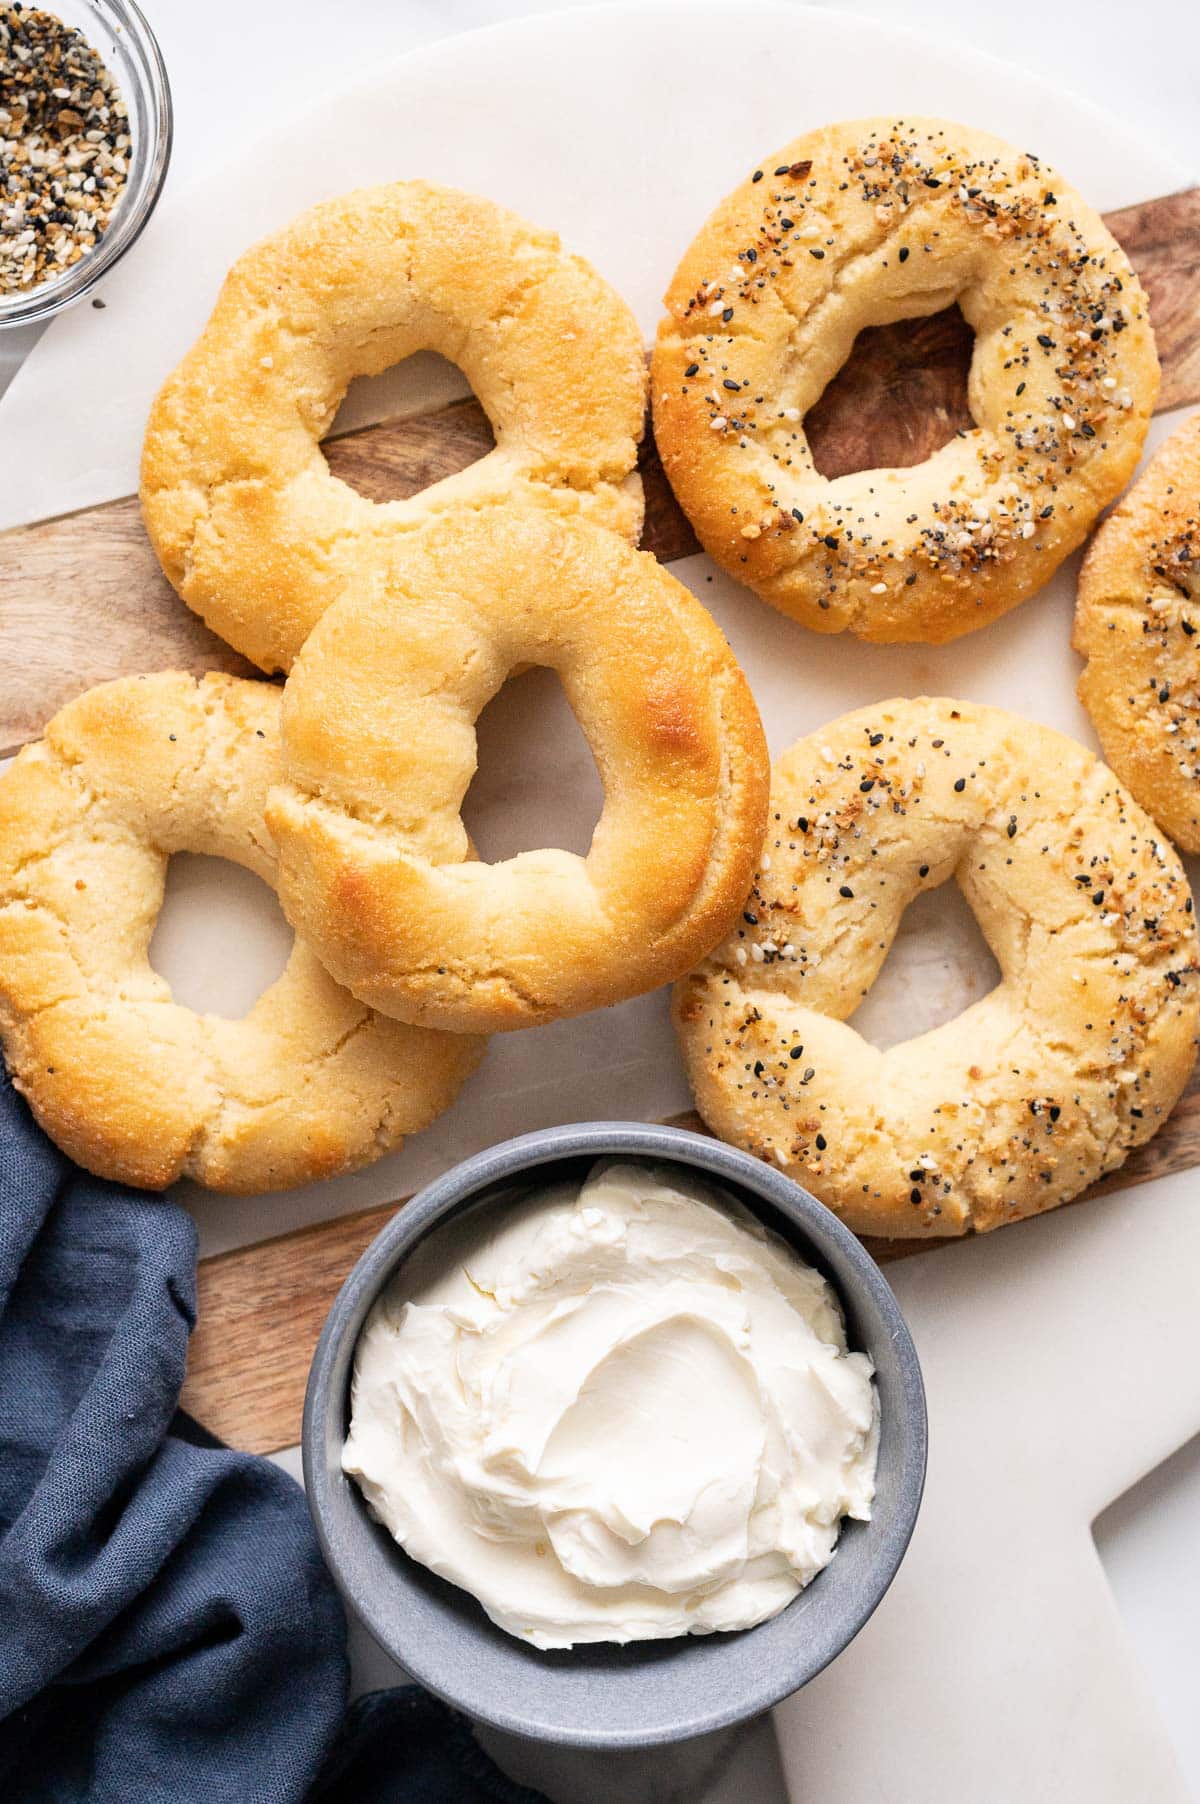 6 almond flour Greek yogurt bagels. Some with everything bagel seasoning on top. Cream cheese in a bowl.